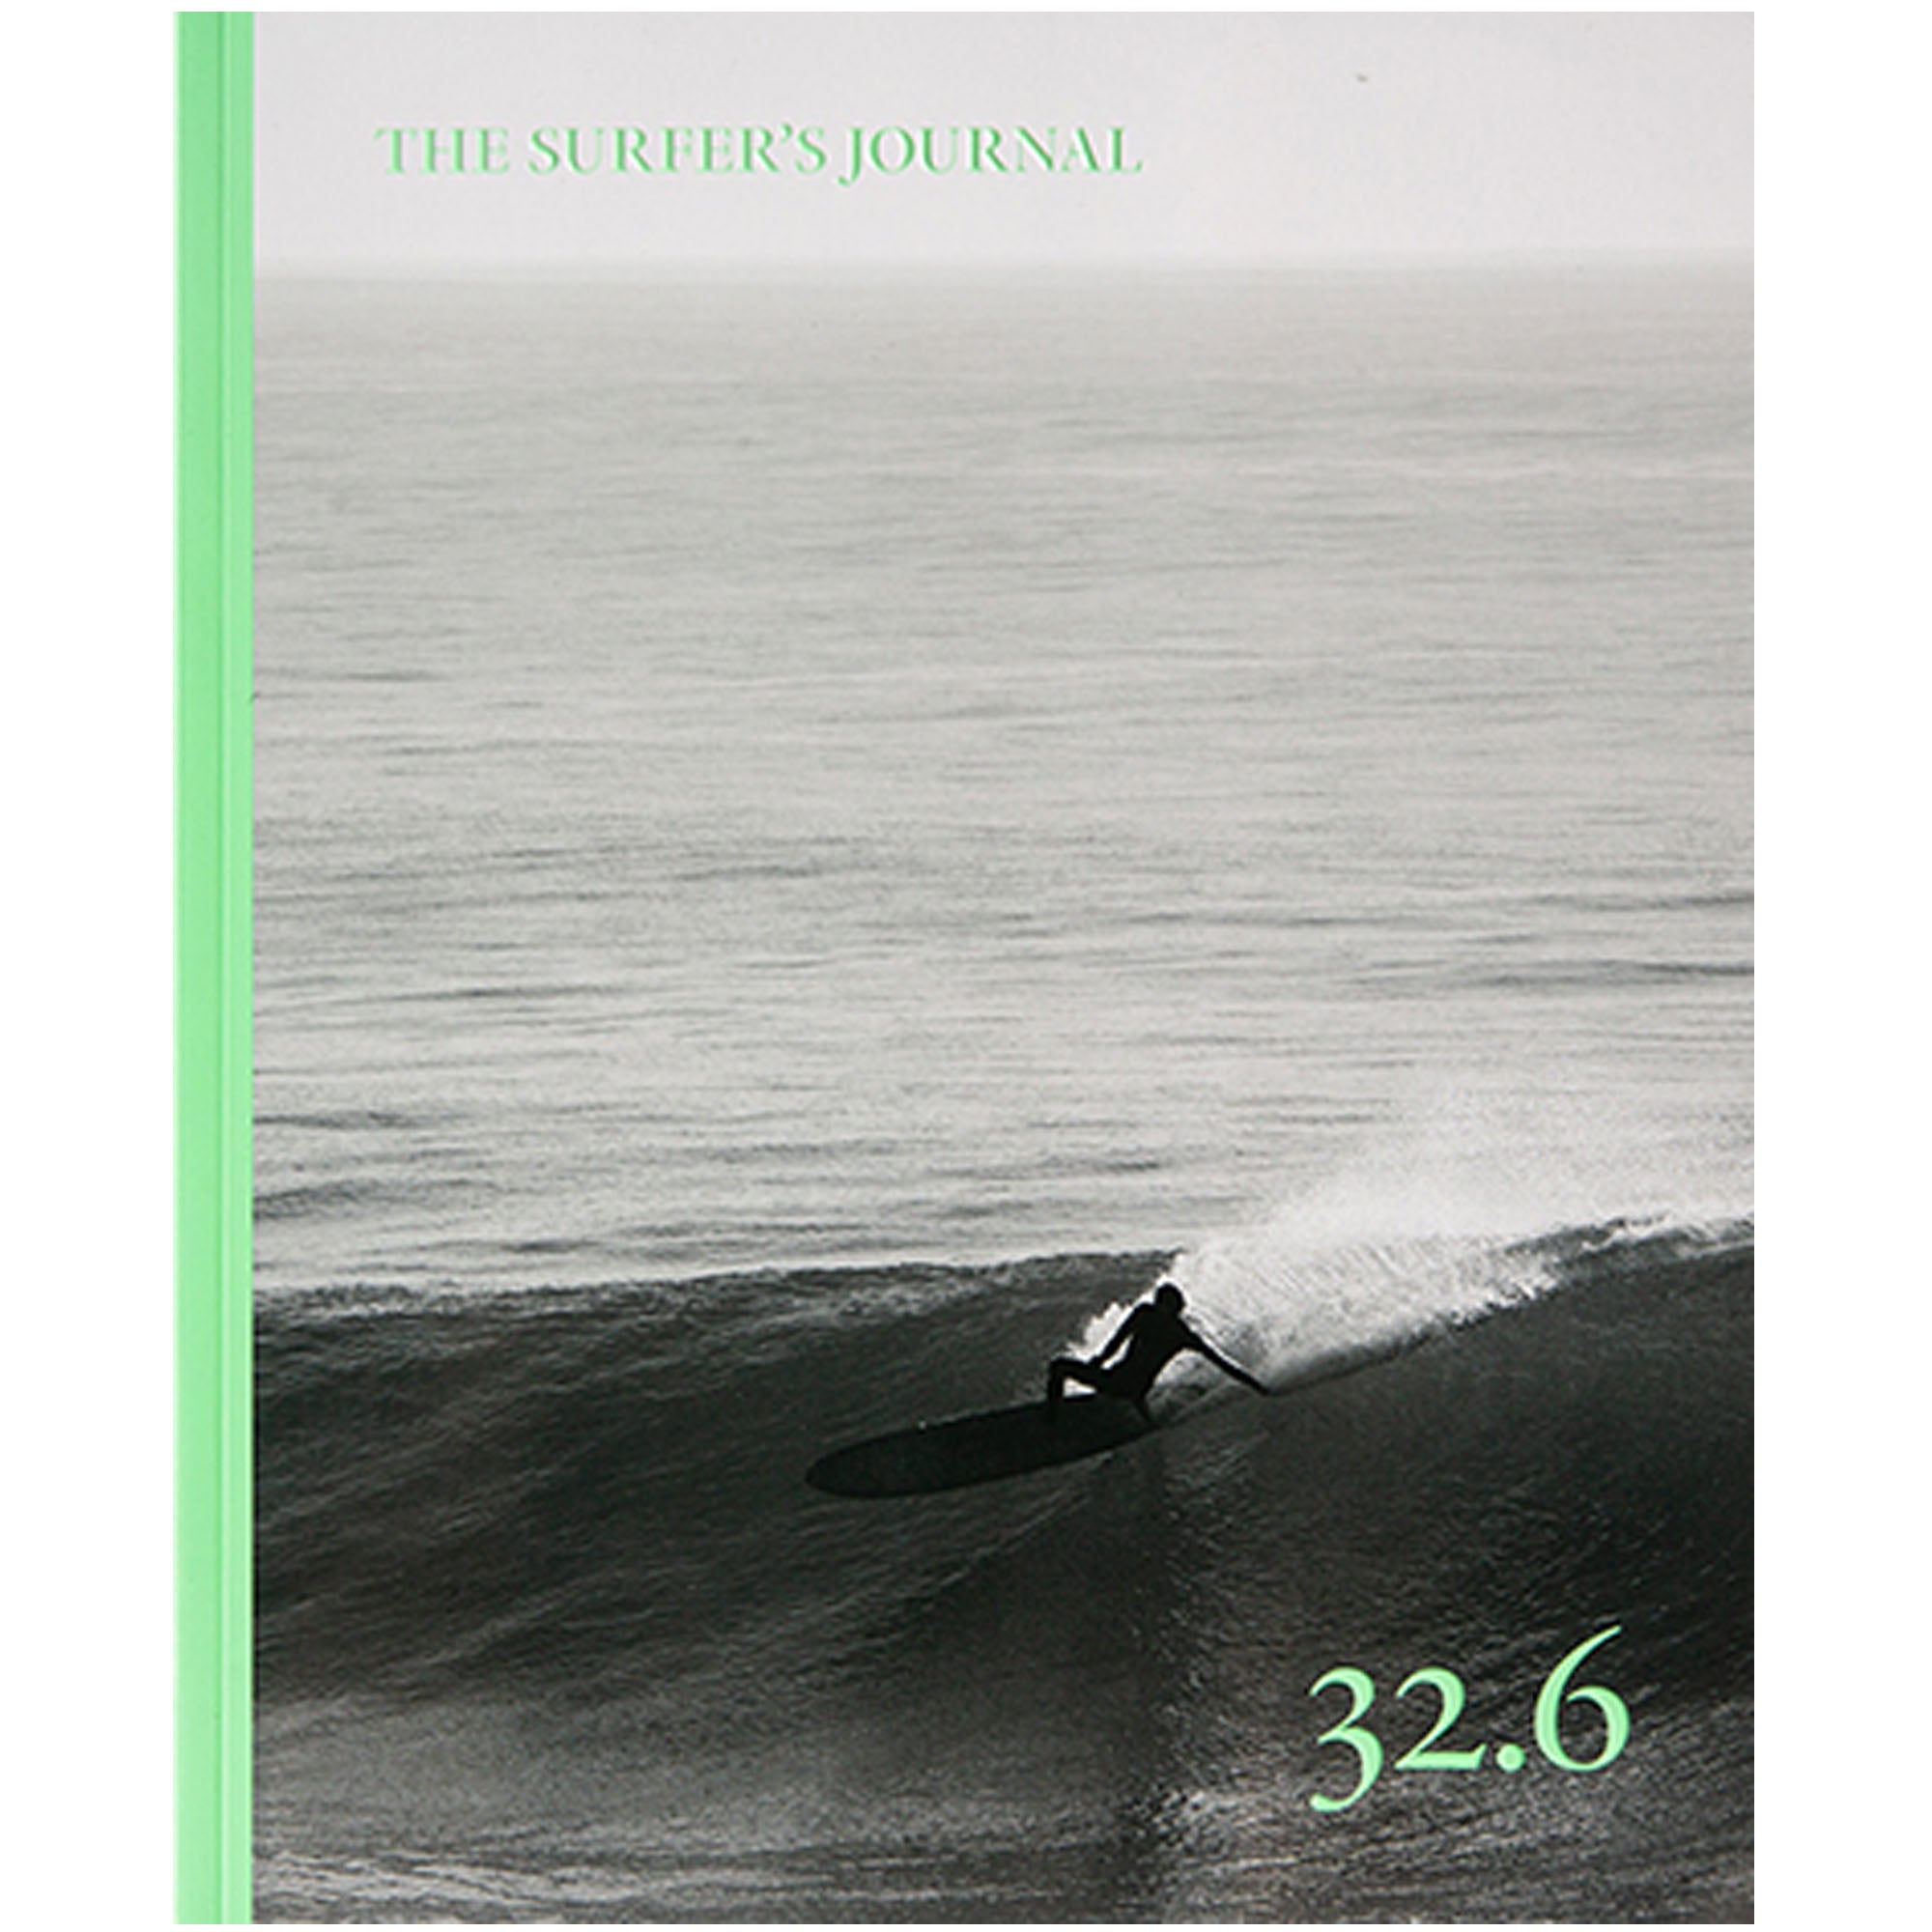 The Surfer Journal #32.6